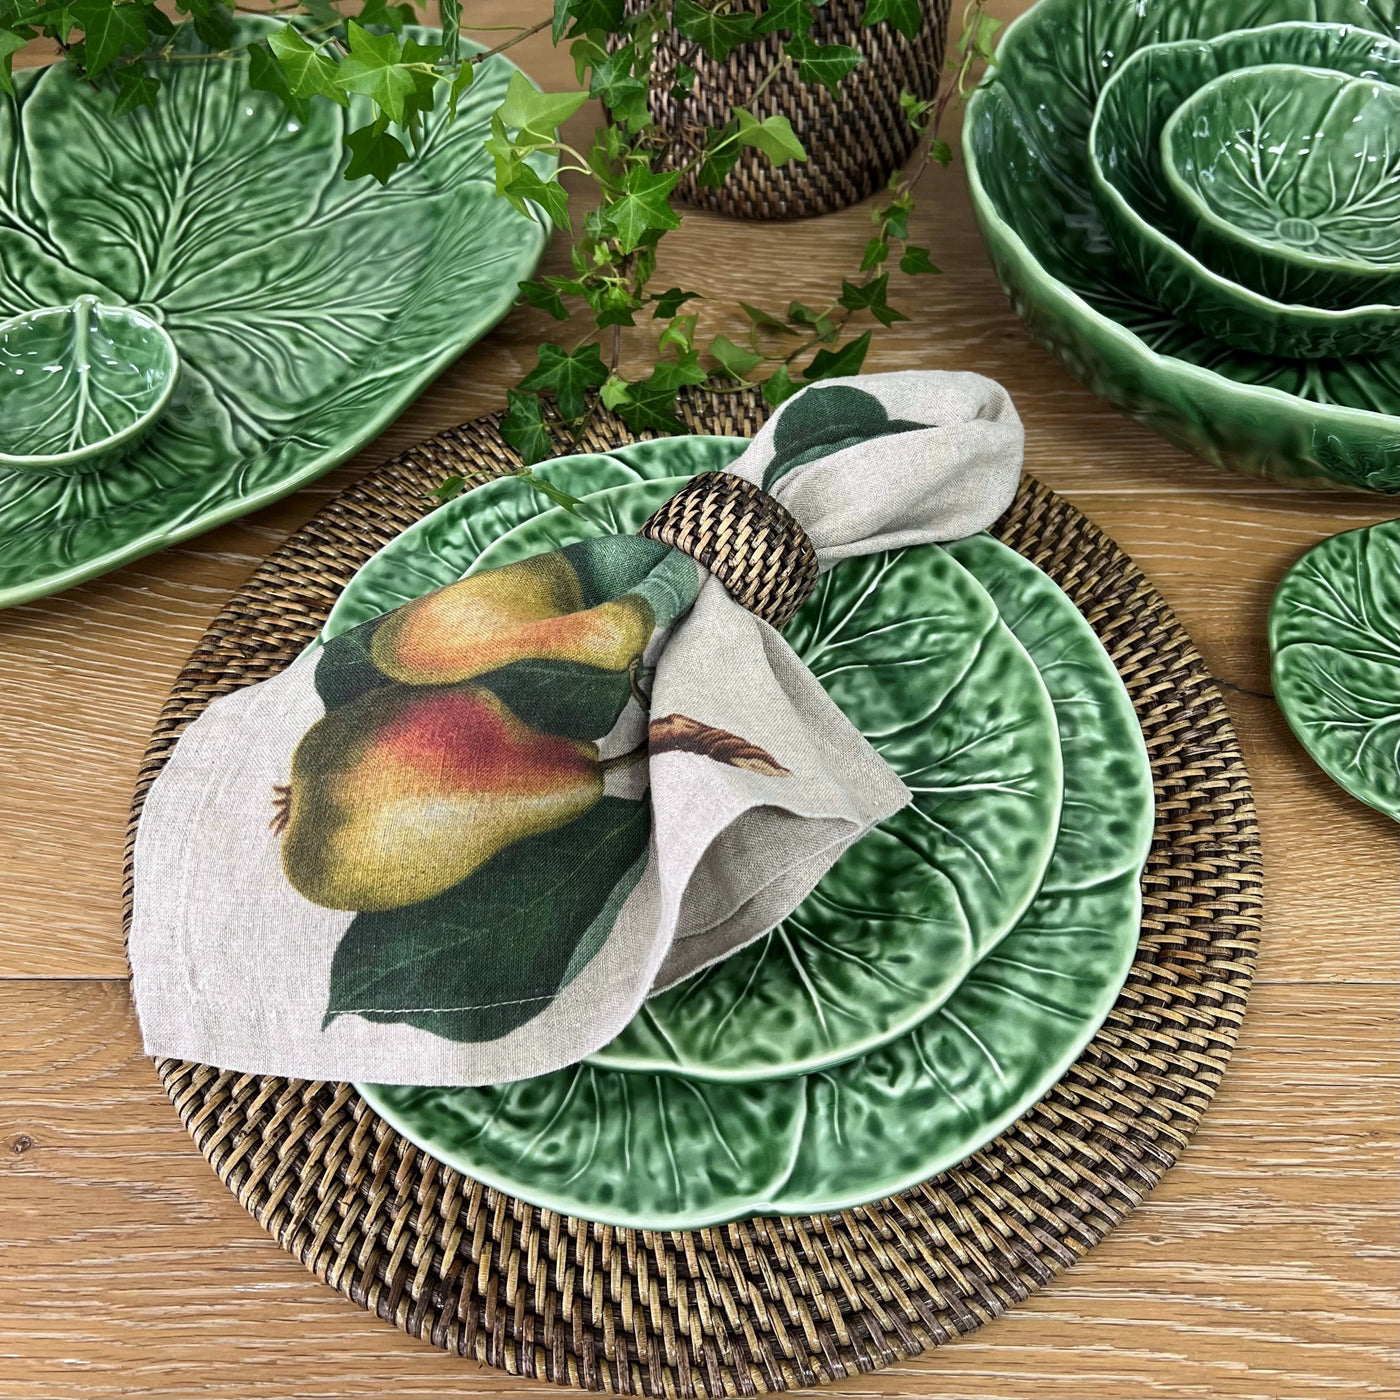 Green Cabbage Side Plate 20.5cm